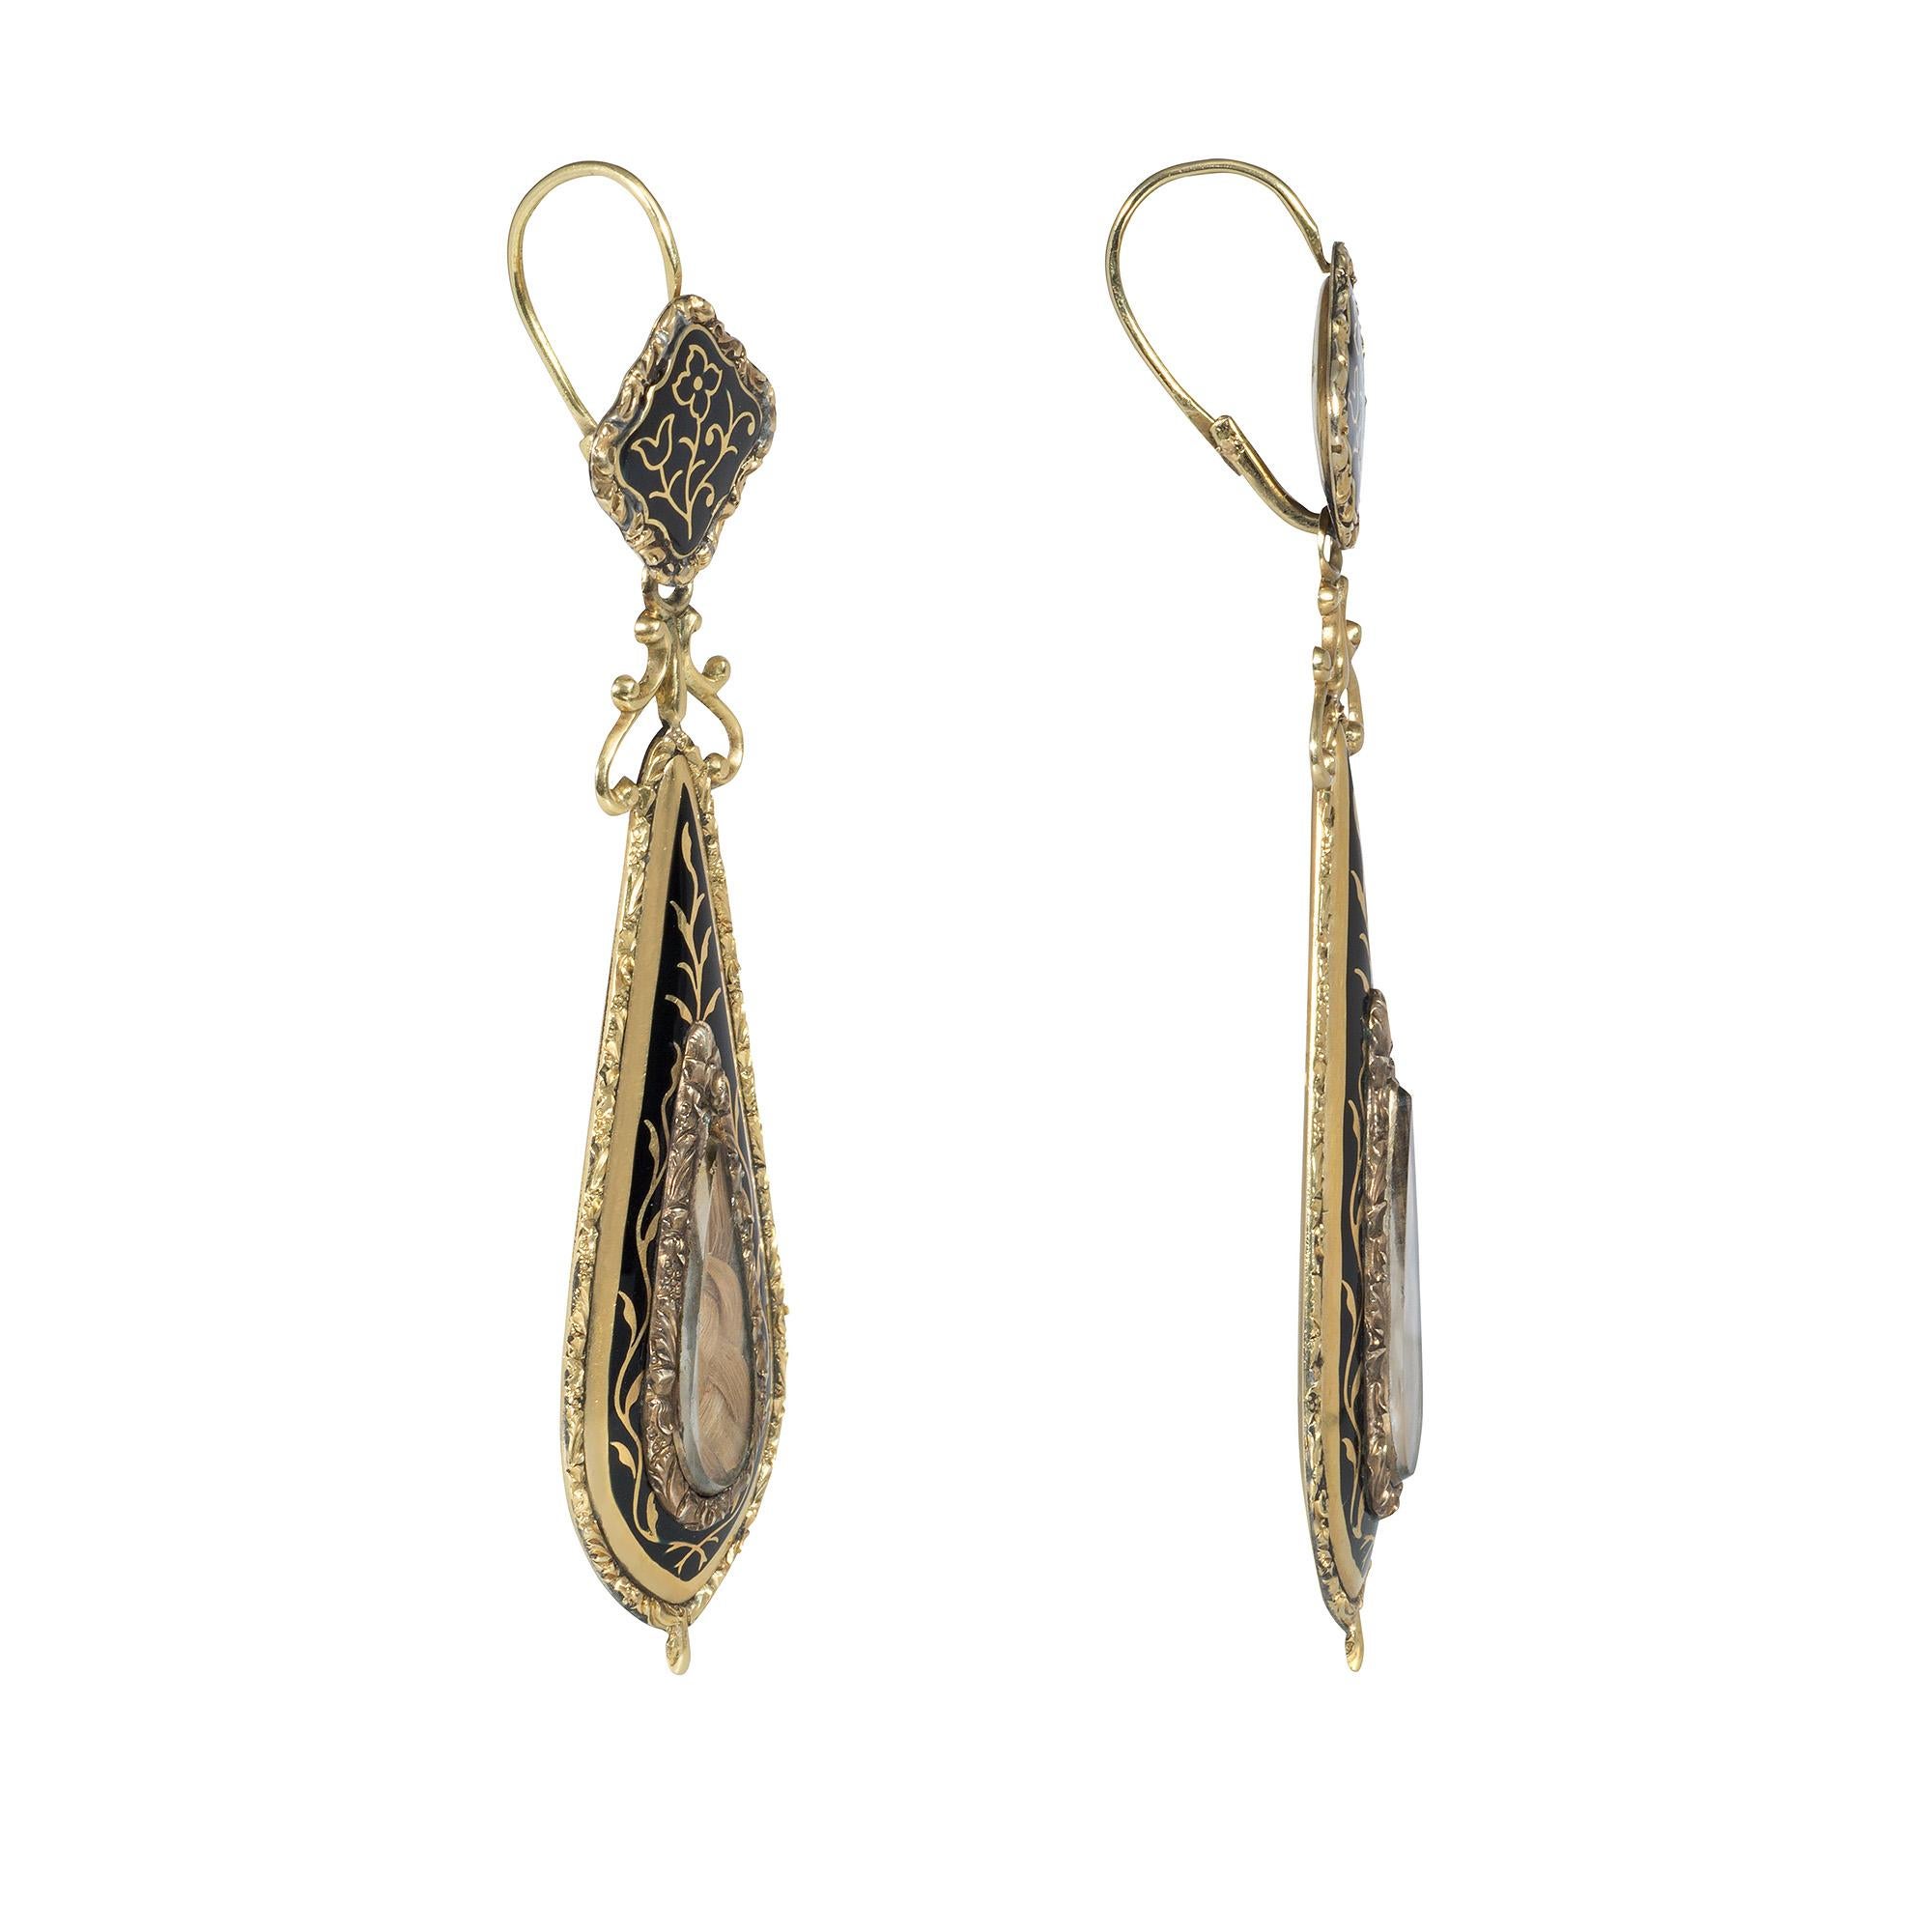 A pair of antique Georgian period black enamel and gold day-to-night mourning earrings comprised of removable drop-shaped pendants of foliate design with a plaited hair inset under crystal and scrolled surmounts, suspended from diamond-shaped floral